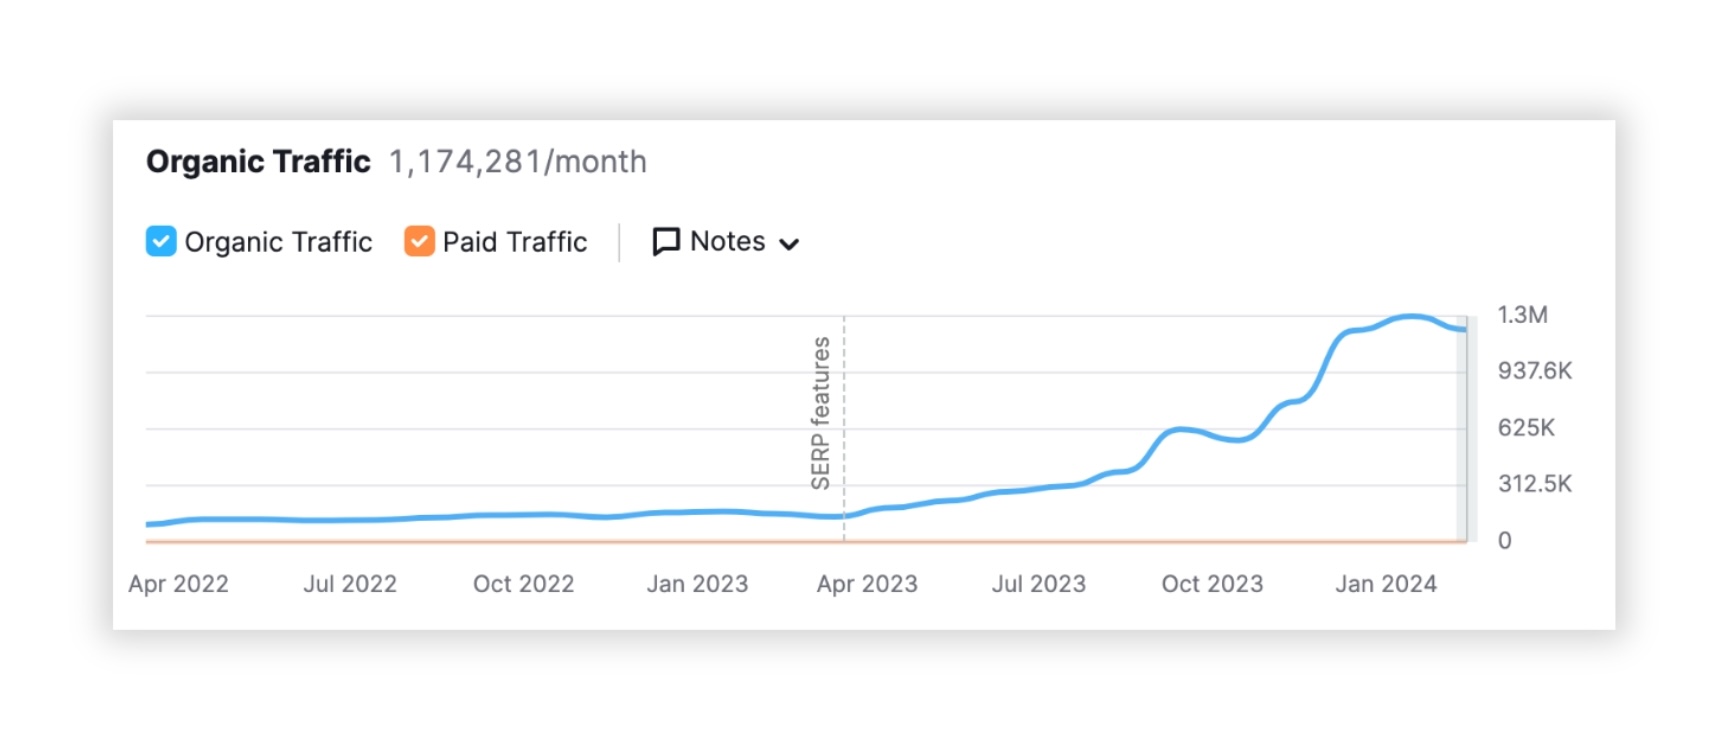 Semrush graph showing the organic traffic from April 2022 to January 2024 for Forbes' traffic around pets.